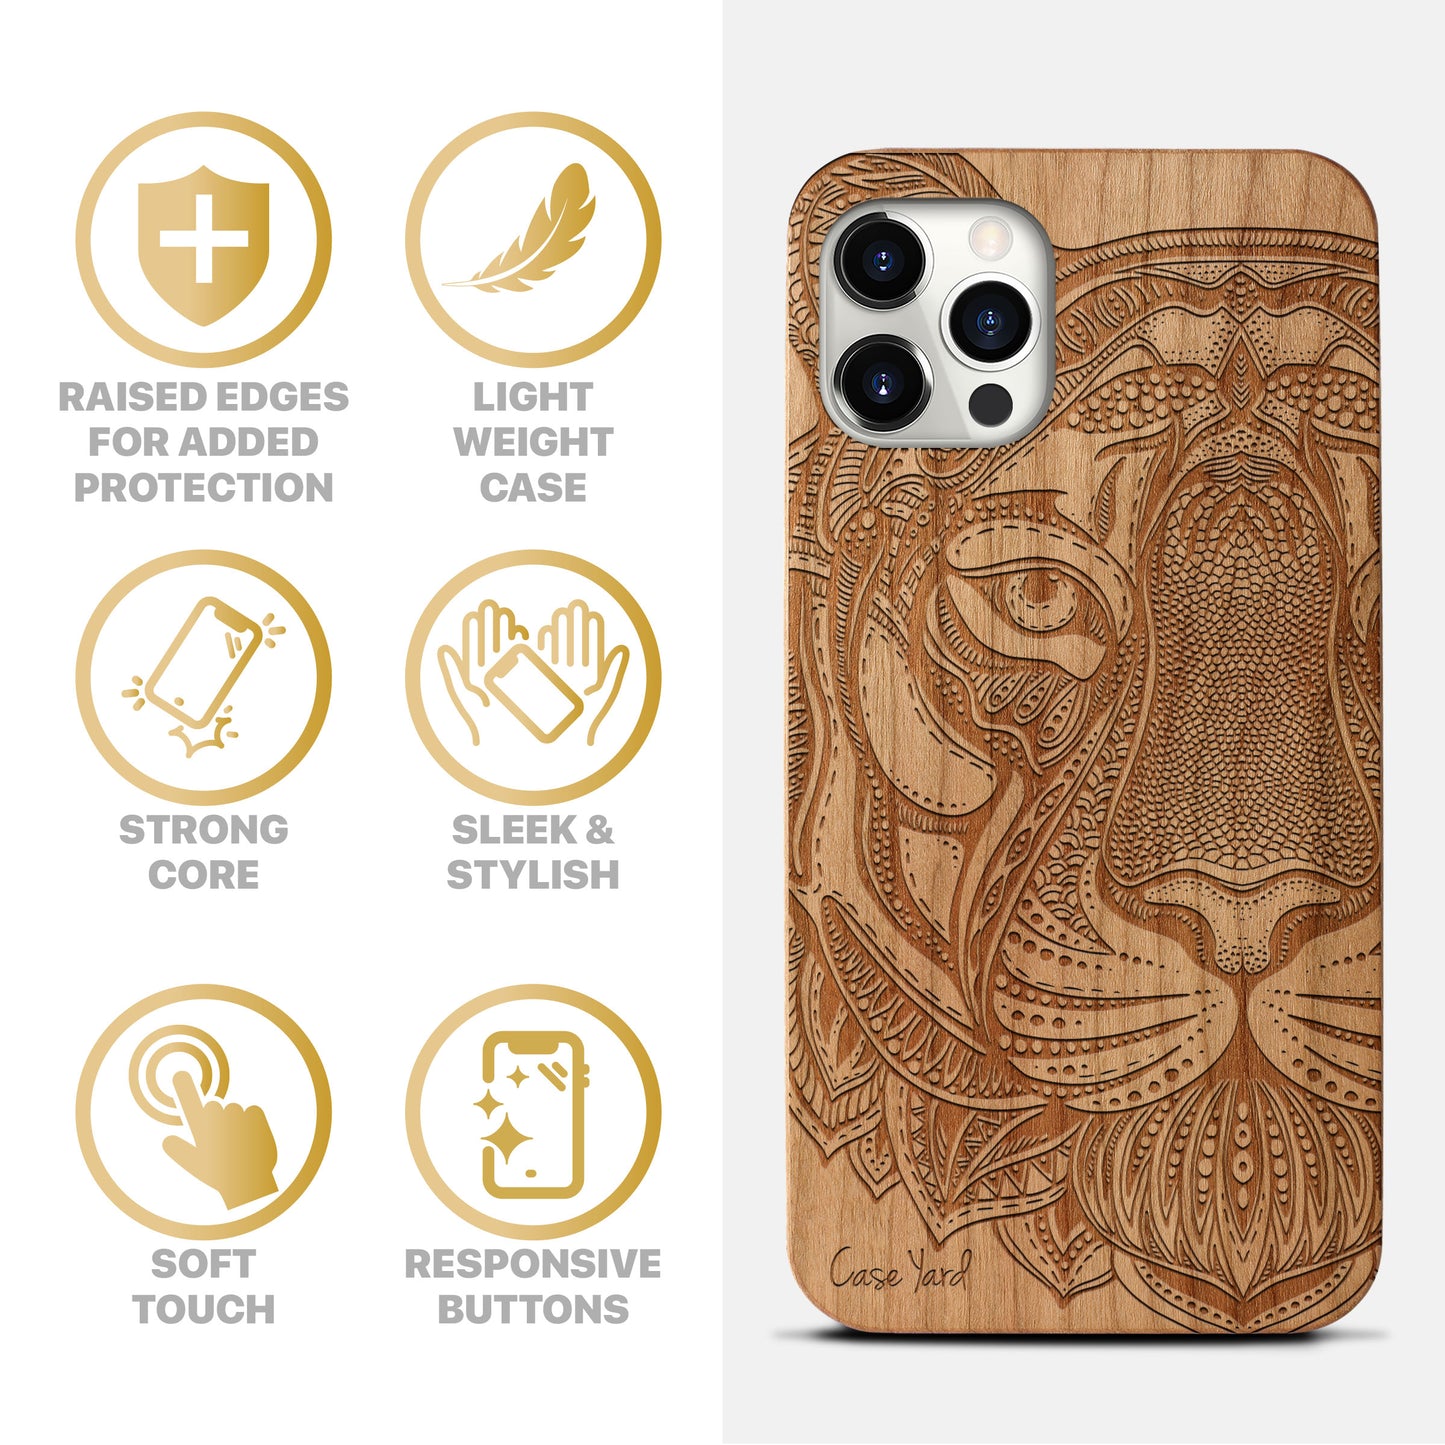 Wooden Cell Phone Case Cover, Laser Engraved case for iPhone & Samsung phone Doodle Tiger Face Design